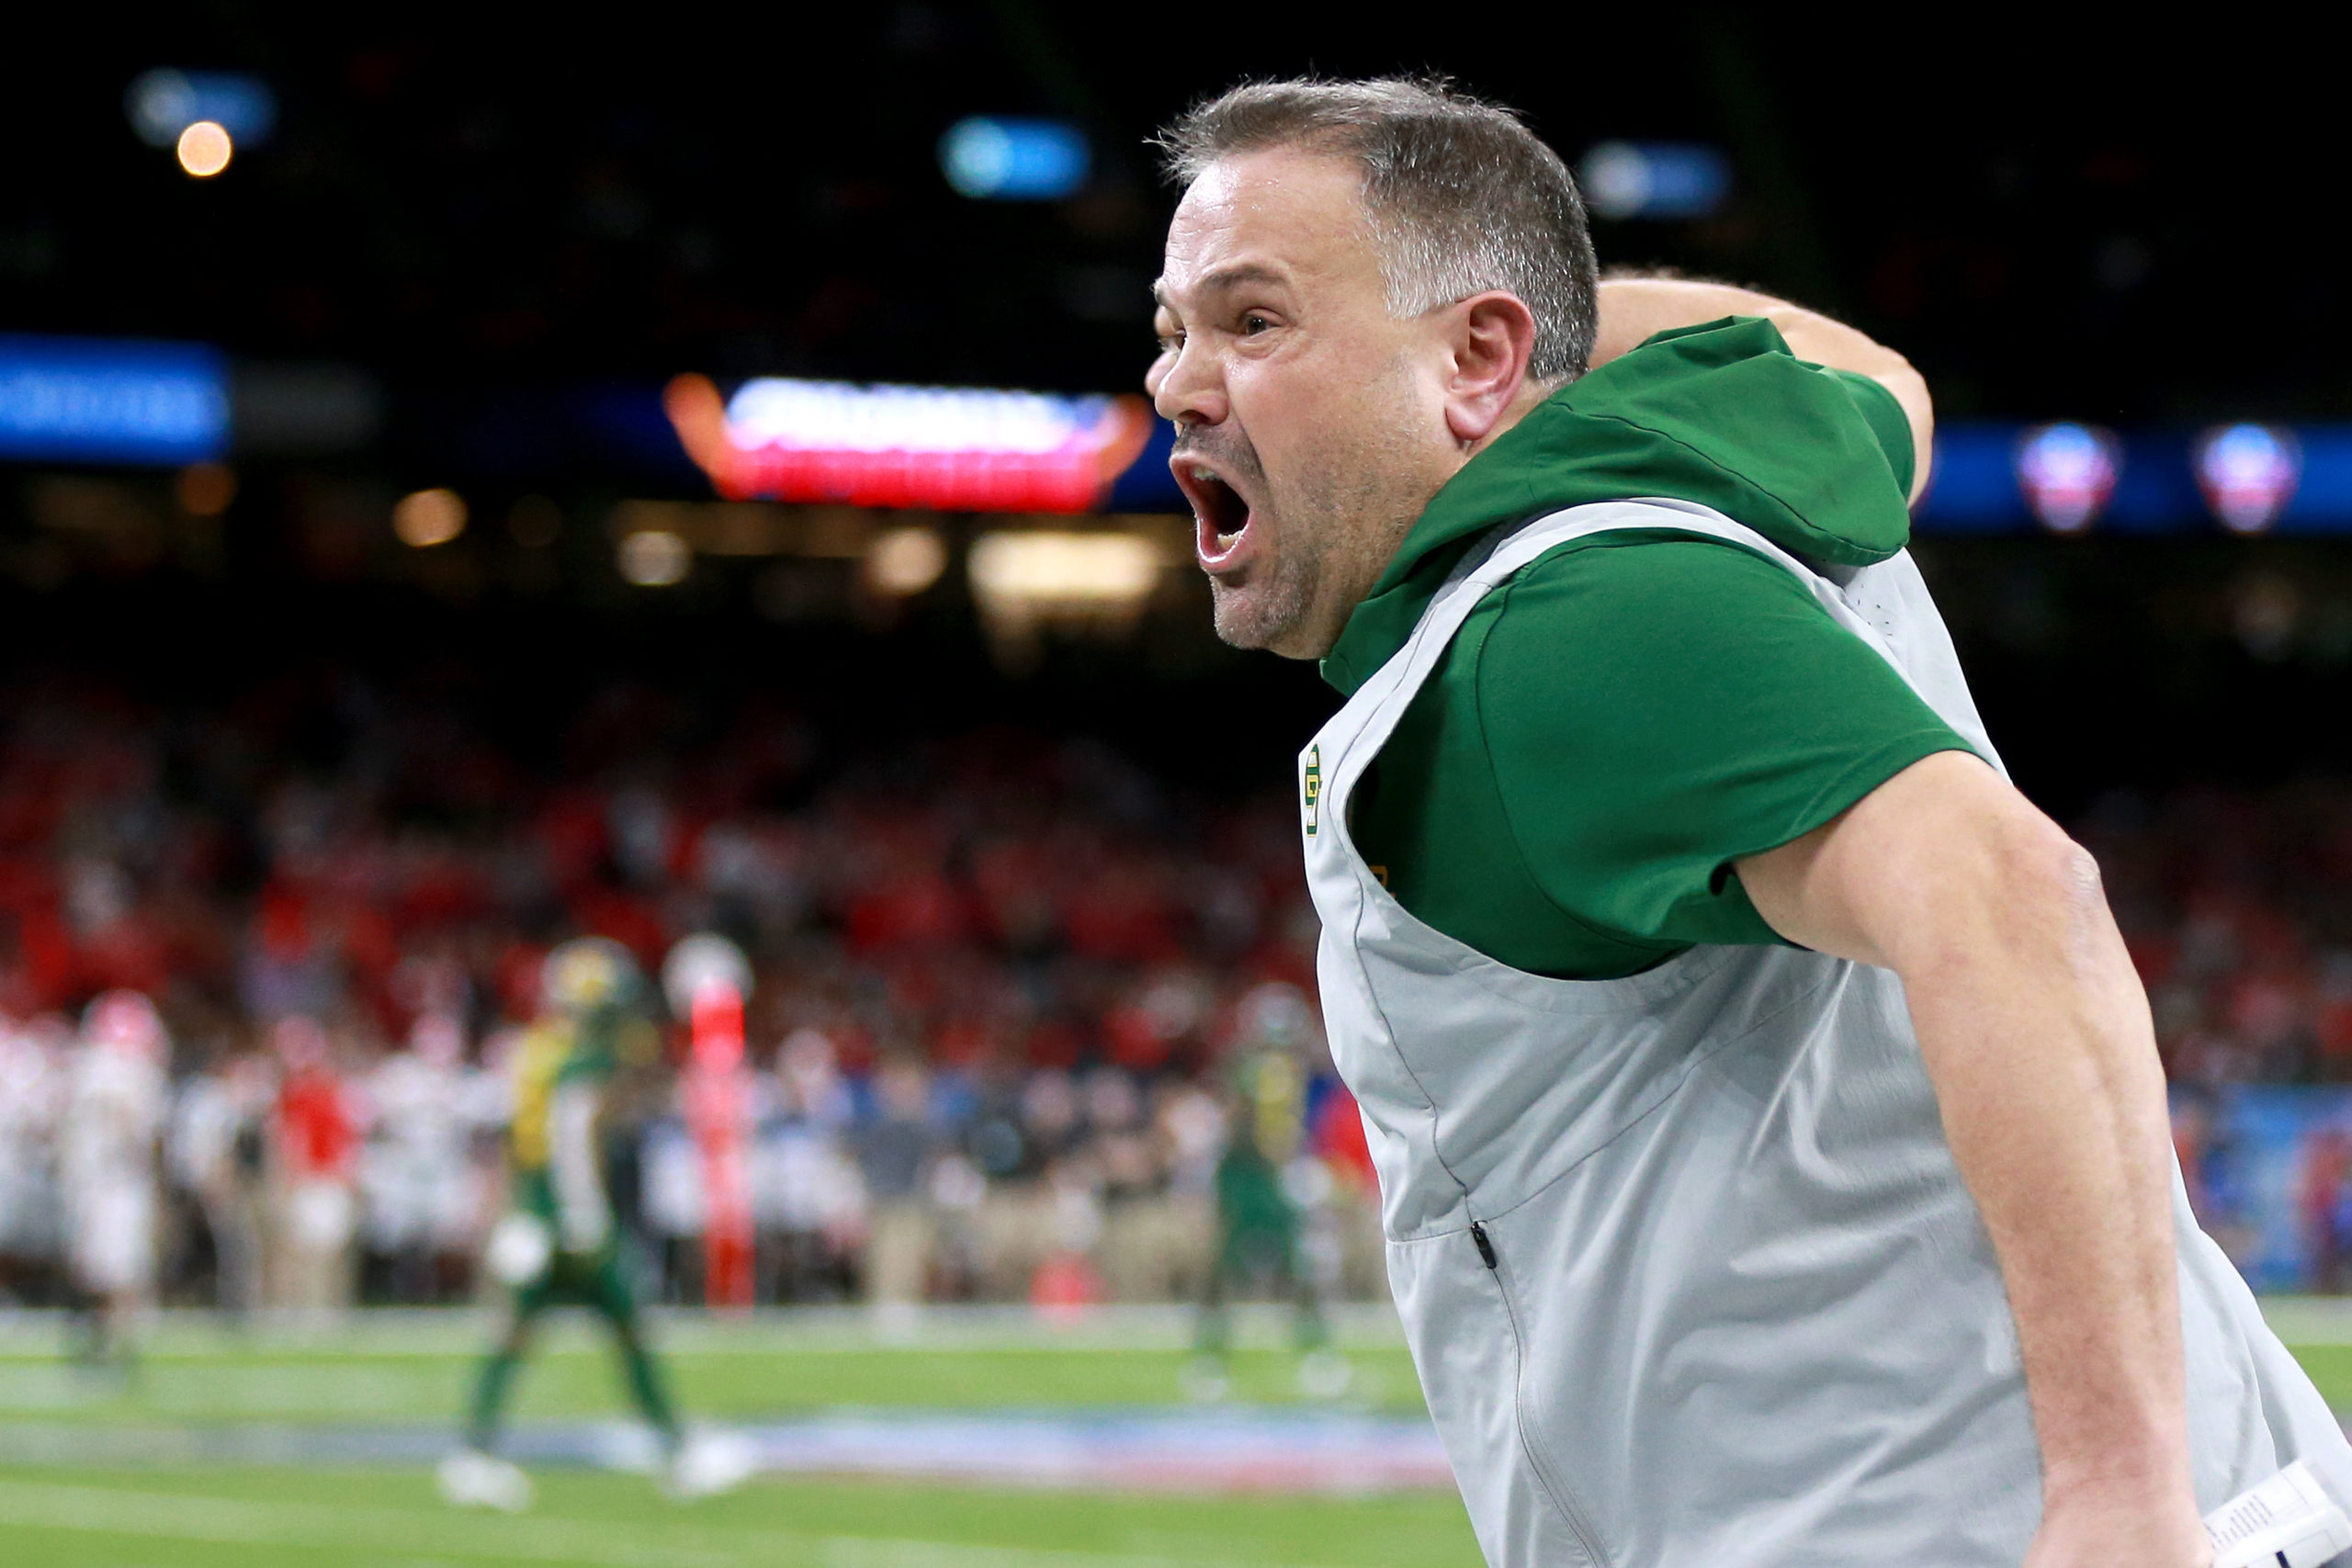 NEW ORLEANS, LOUISIANA - JANUARY 01: Head coach Matt Rhule of the Baylor Bears reacts to a play during the Allstate Sugar Bowl against the Georgia Bulldogs at Mercedes Benz Superdome on January 01, 2020 in New Orleans, Louisiana. Sean Gardner/Getty Images